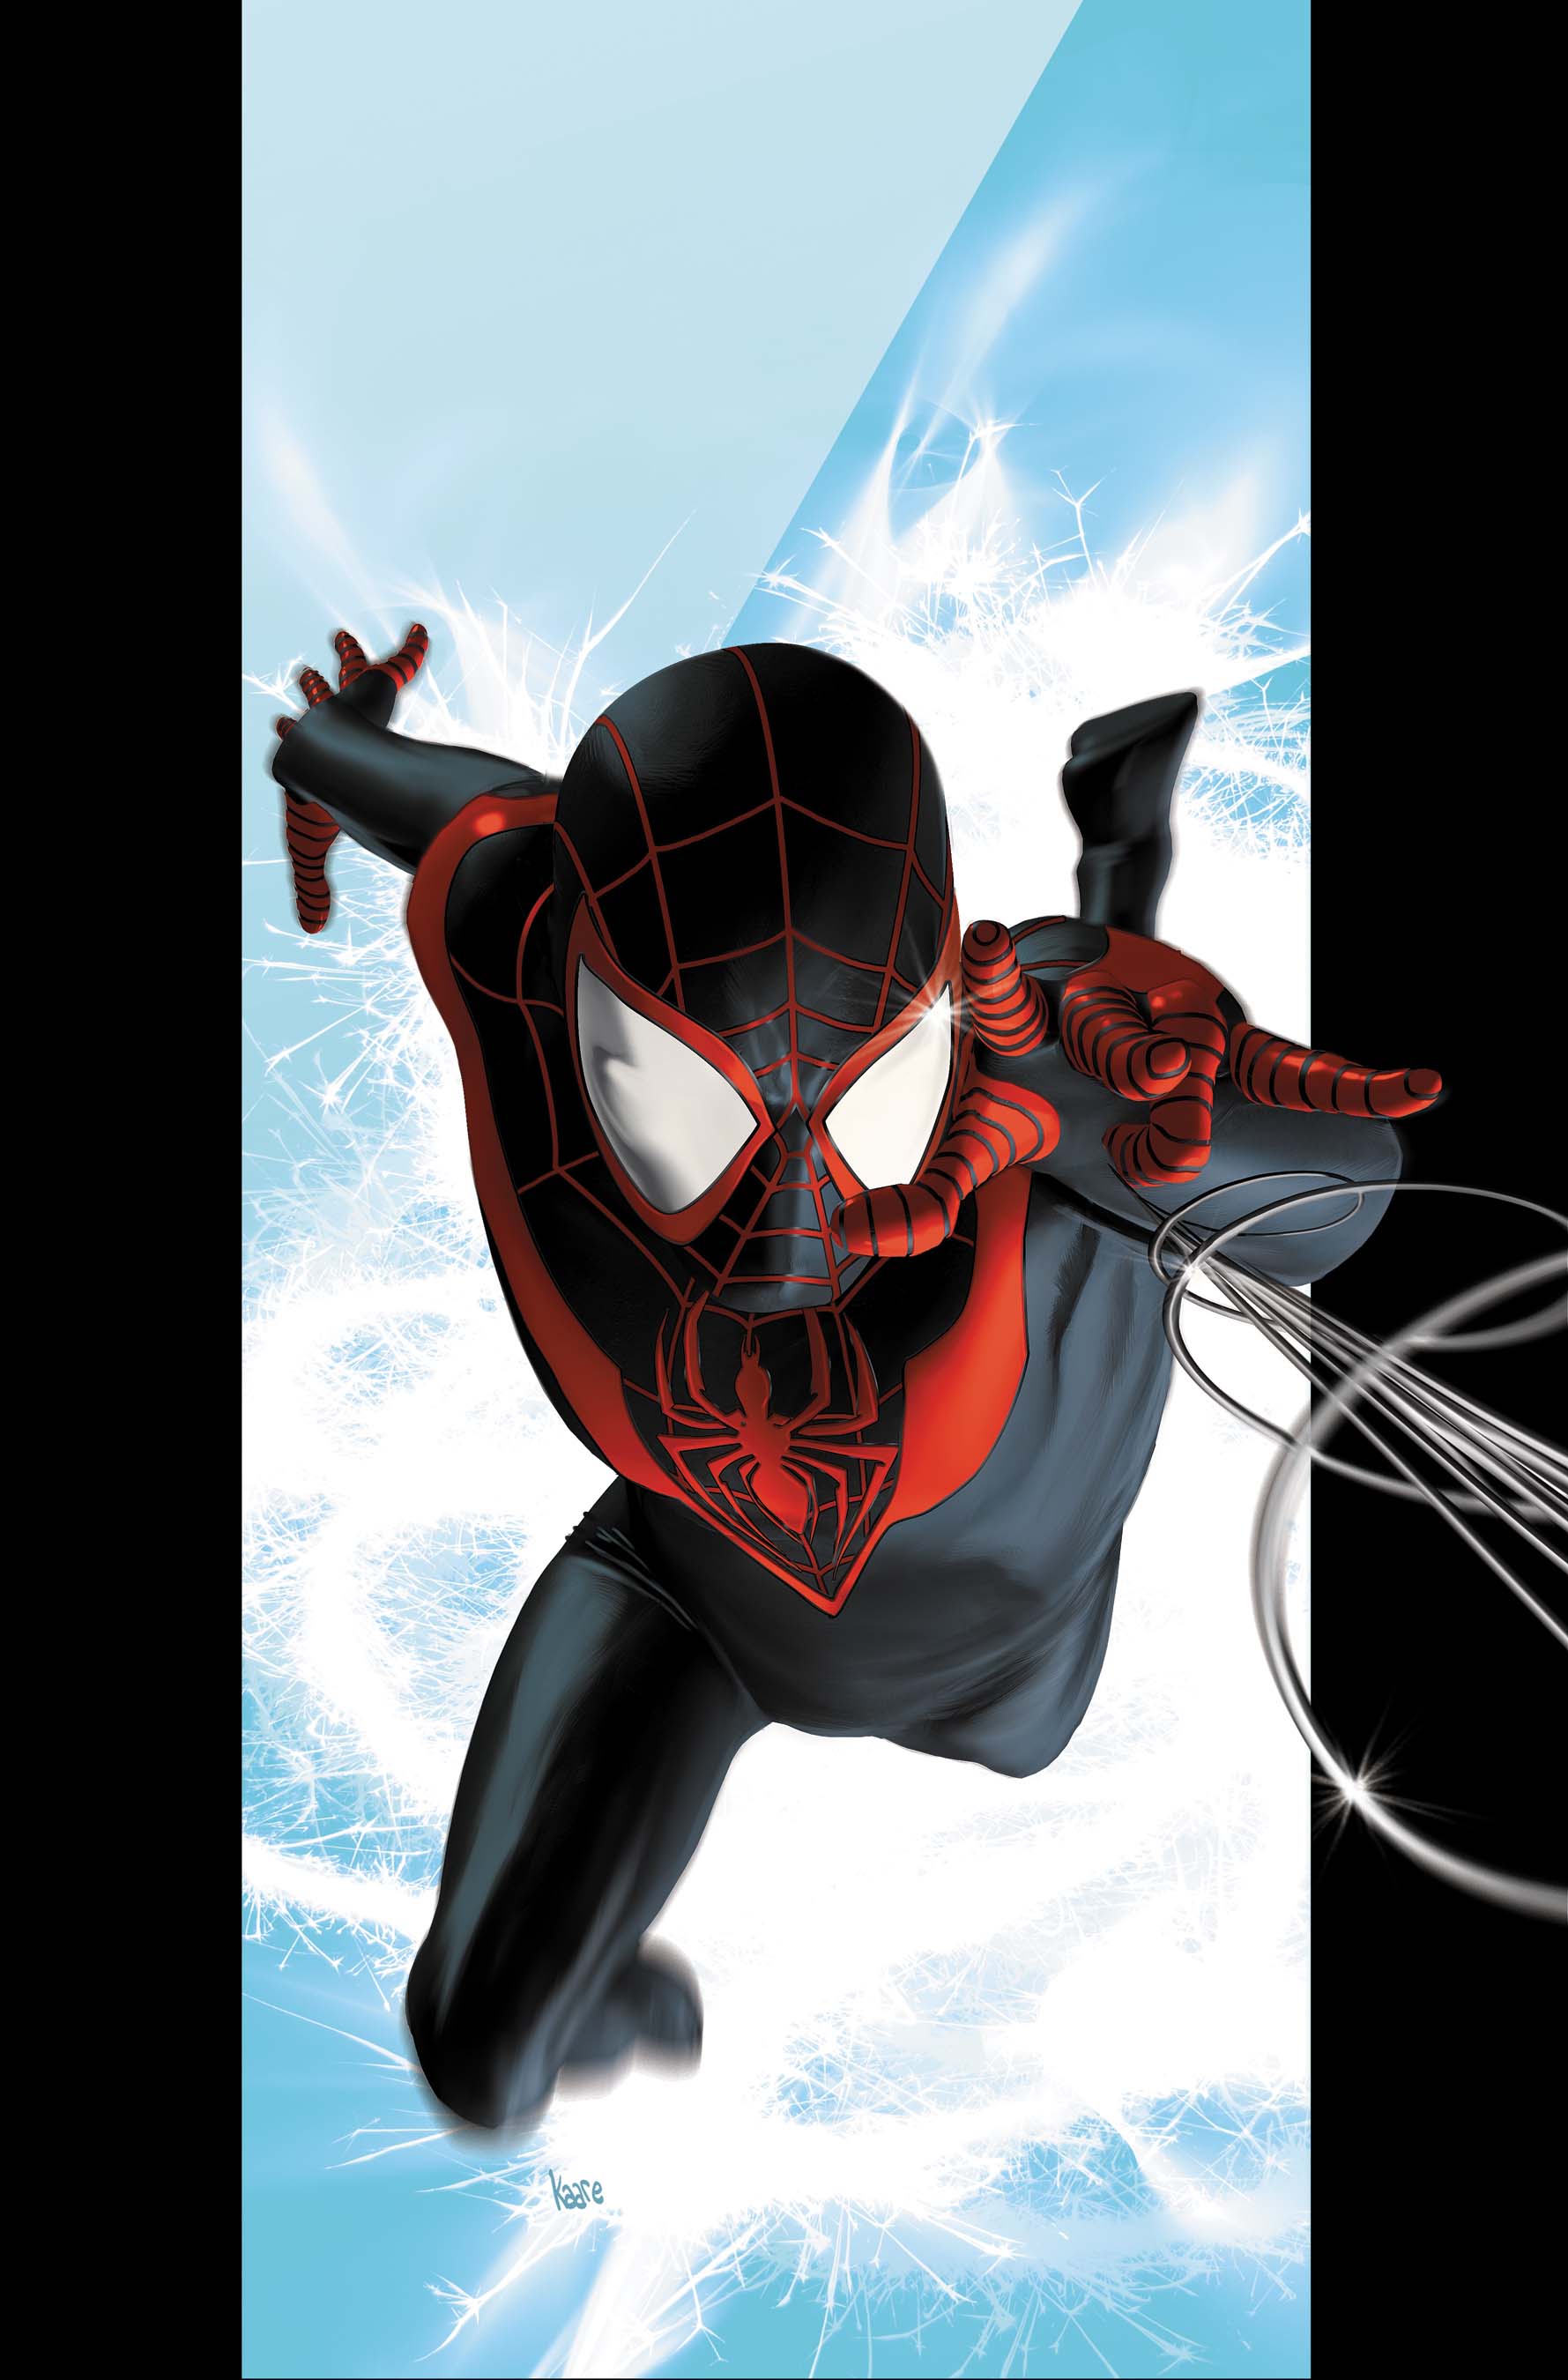 Ultimate Comics Spider-Man Must Have (2011) #1